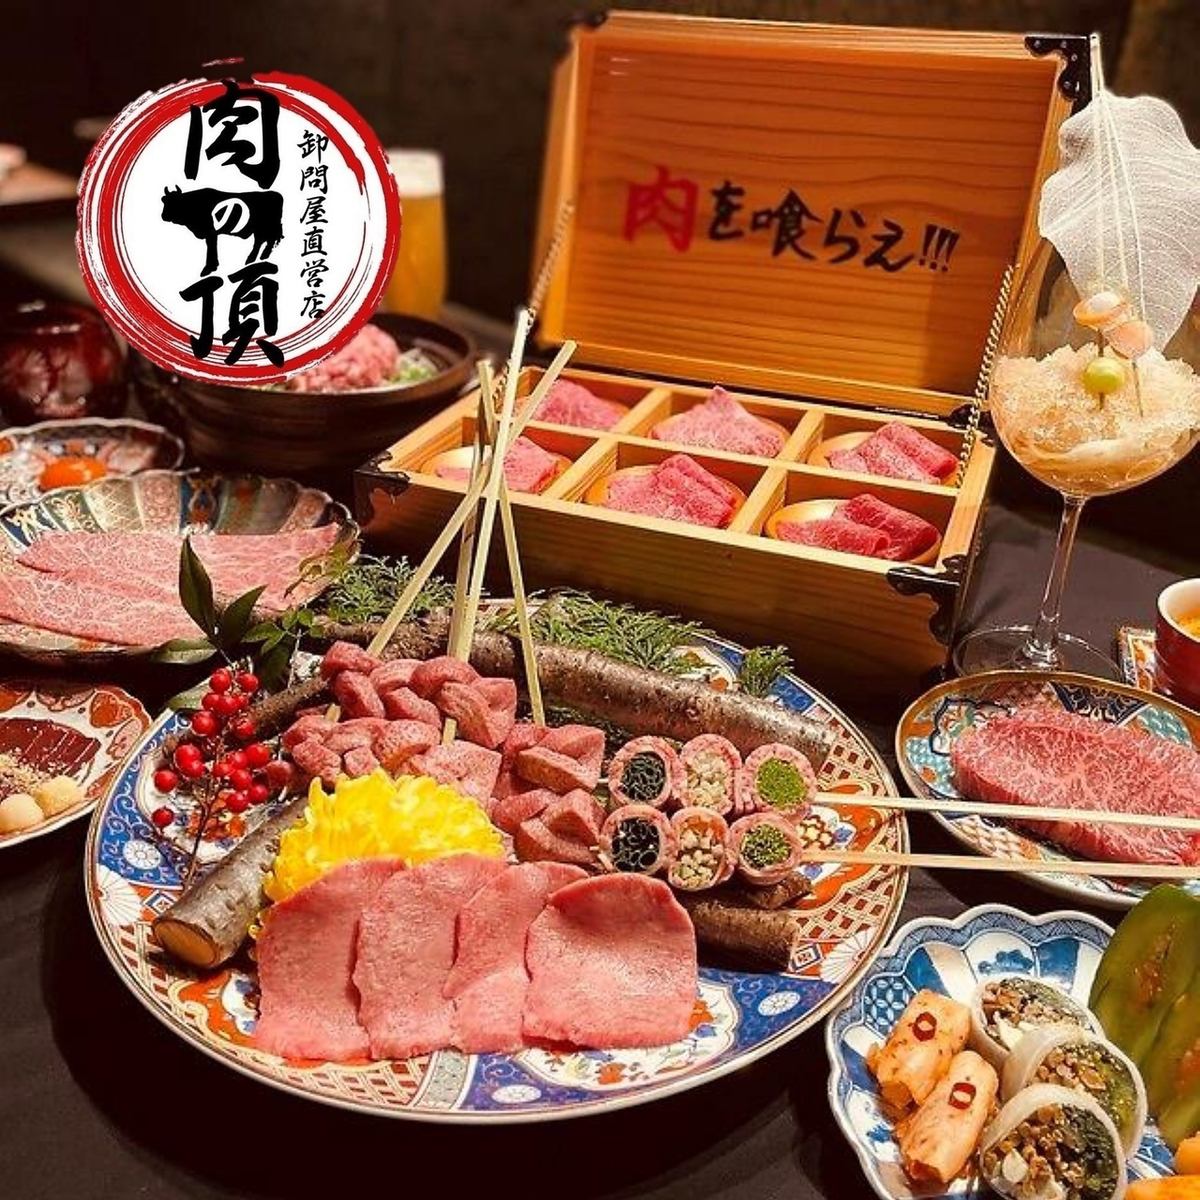 Yakiniku restaurant run by a meat wholesaler! We offer fresh, high-quality meat at reasonable prices.